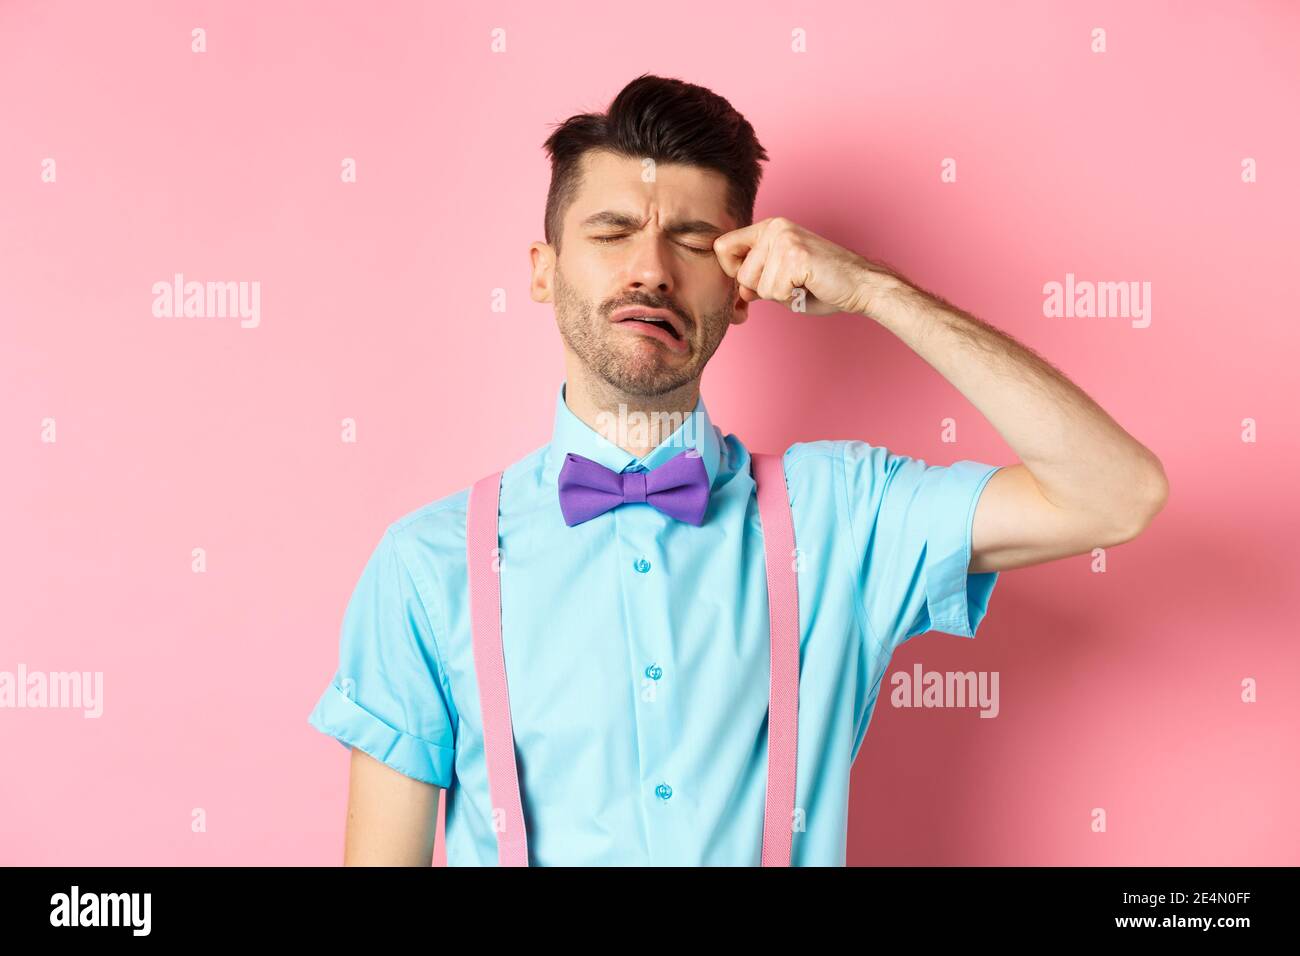 Image of heartbroken guy crying and wiping tear off face, sobbing and feeling sad or lonely, standing upset on pink background Stock Photo